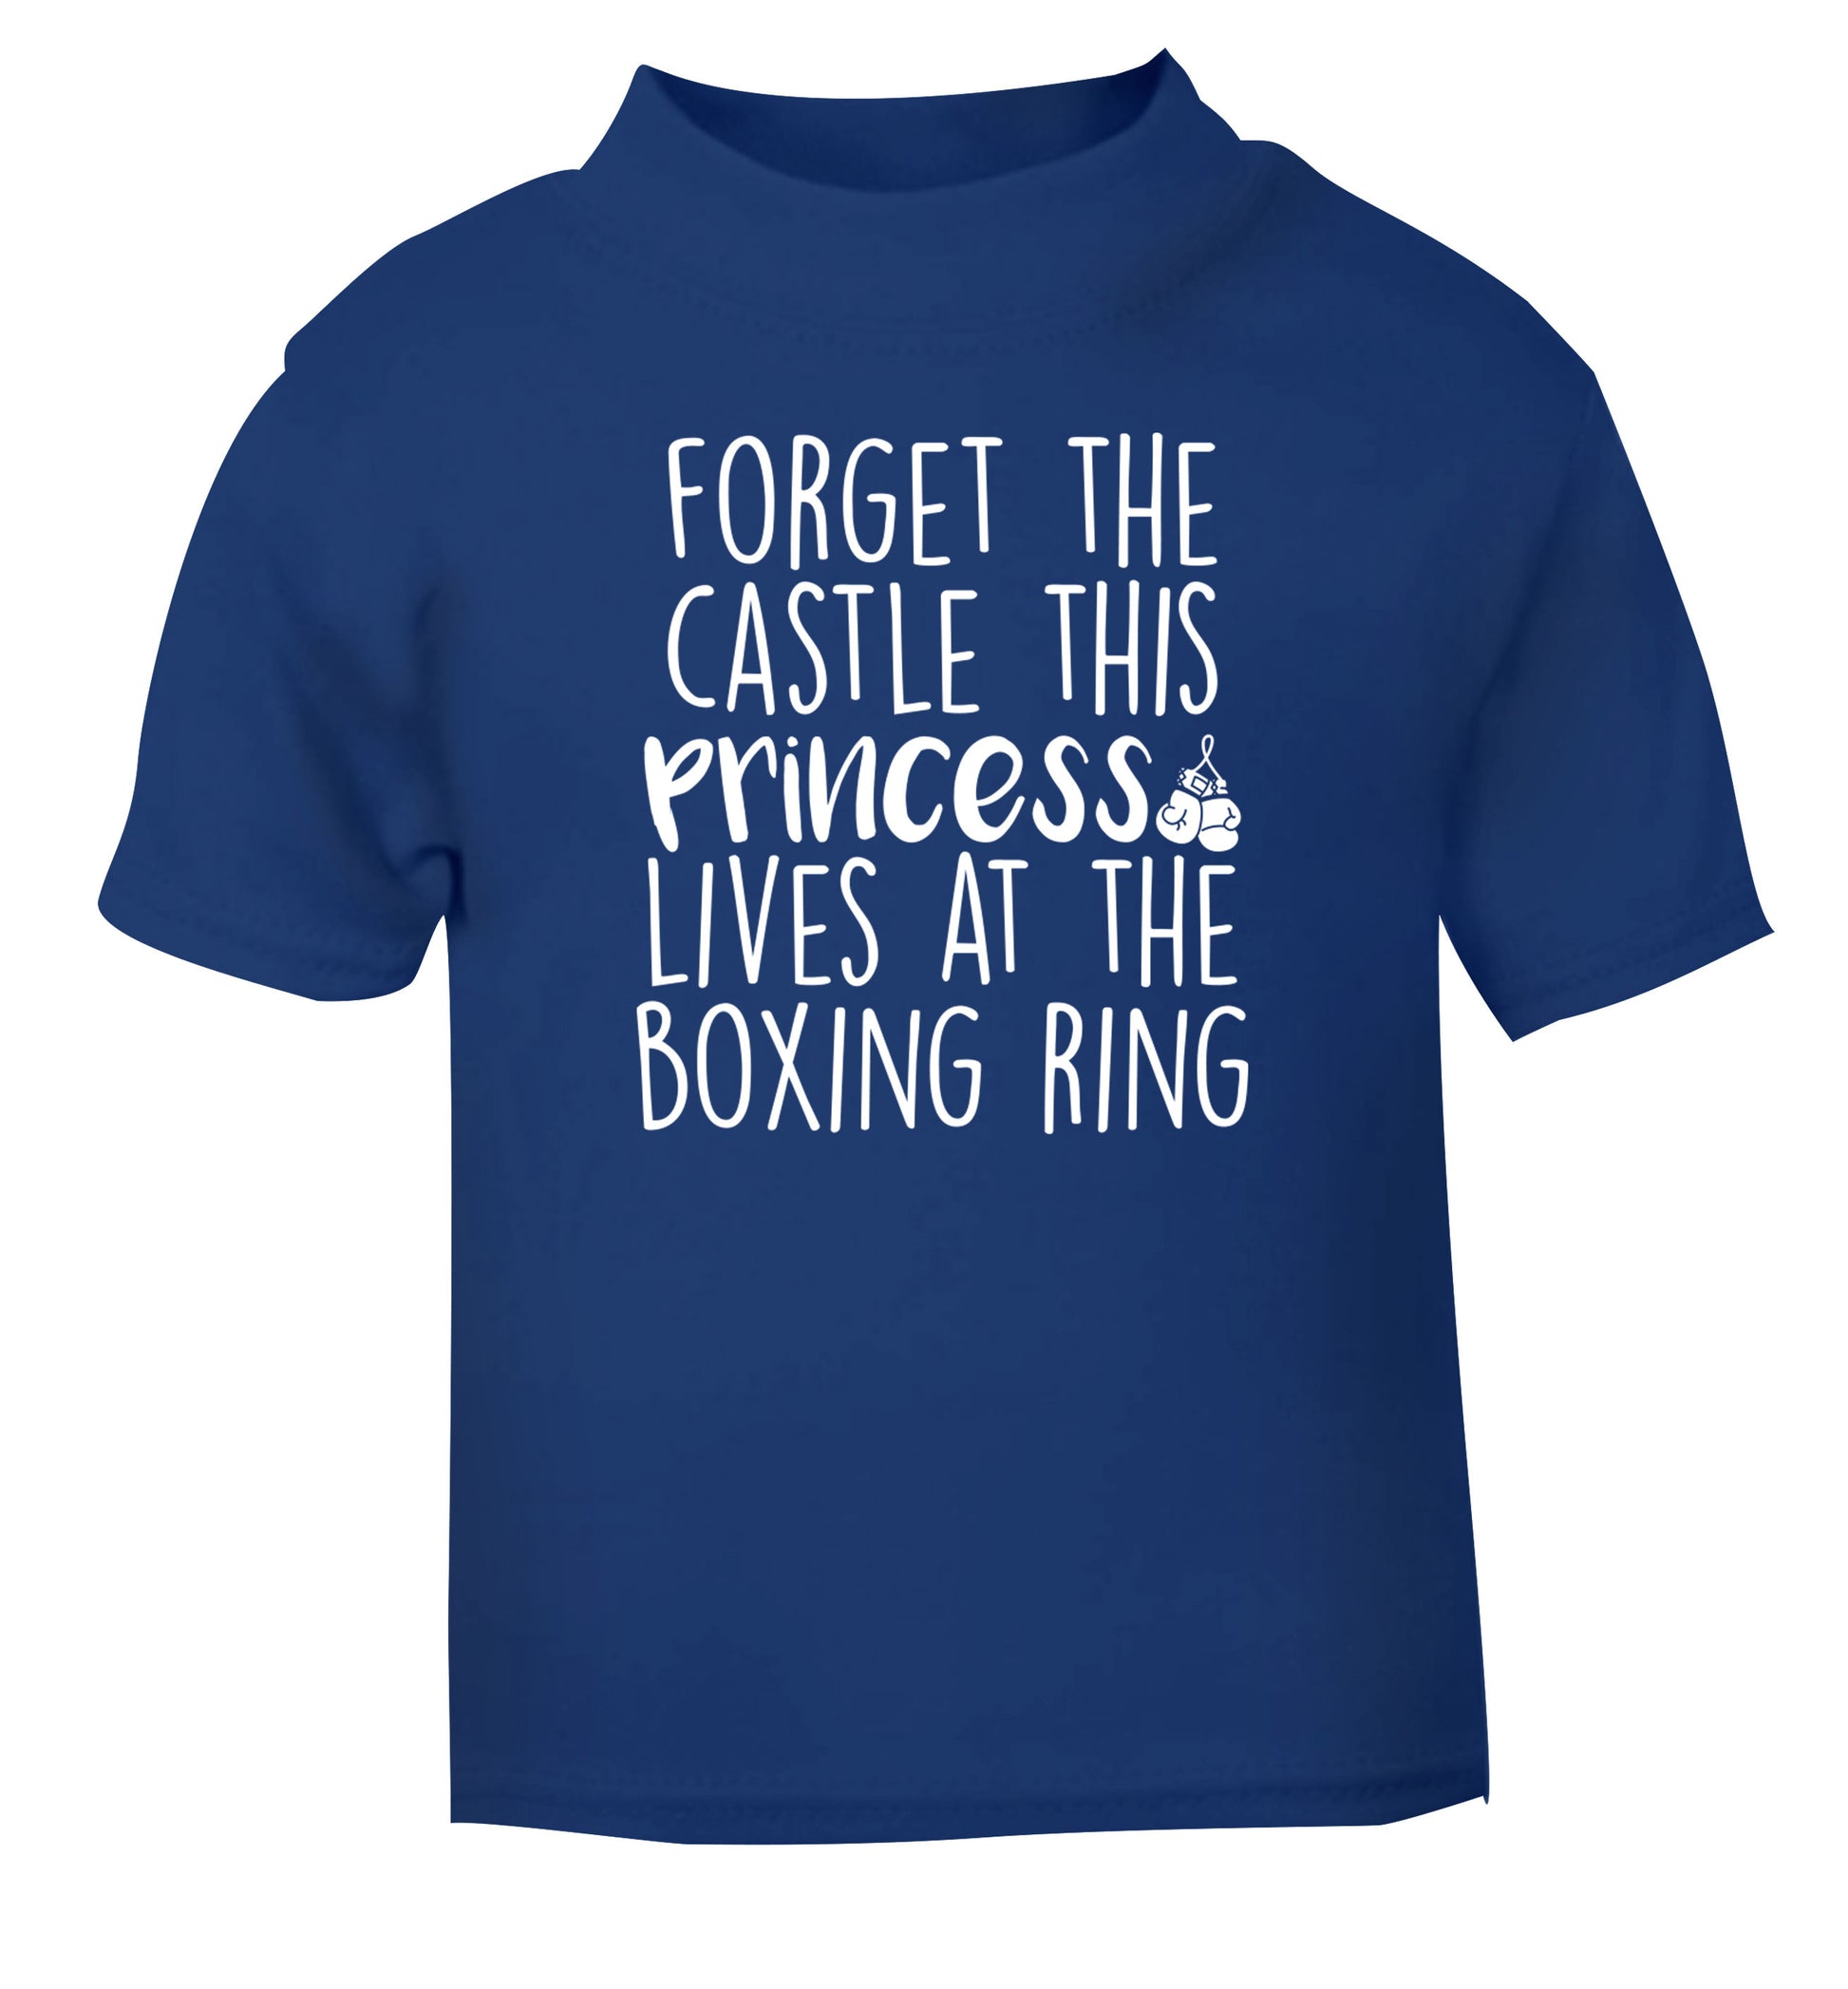 Forget the castle this princess lives at the boxing ring blue Baby Toddler Tshirt 2 Years